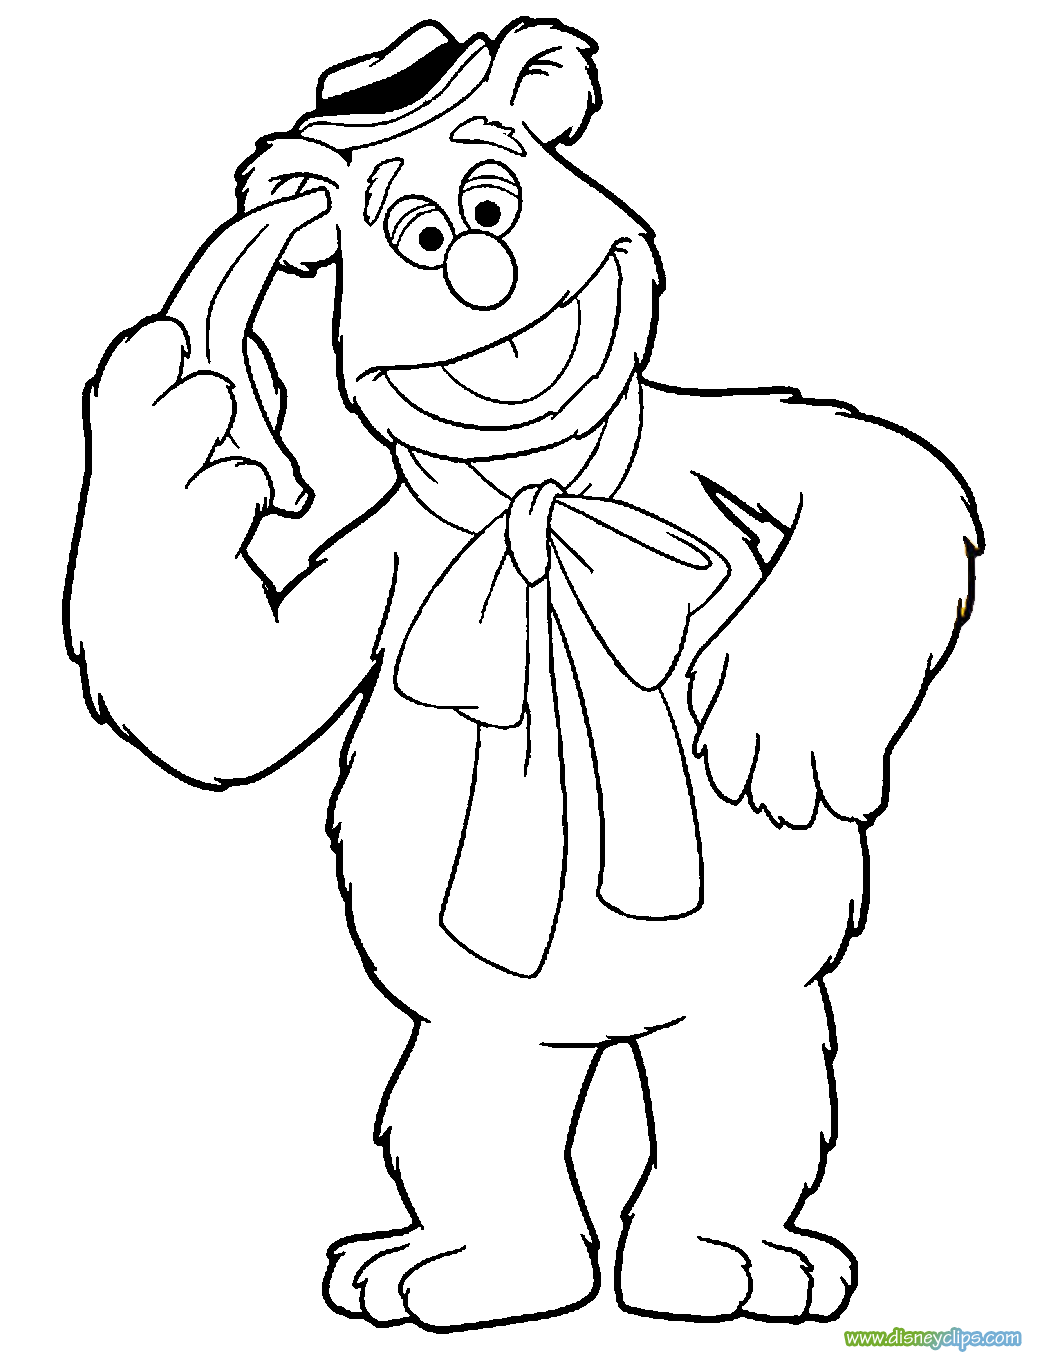 The Muppets Coloring Pages | Disneyclips.com